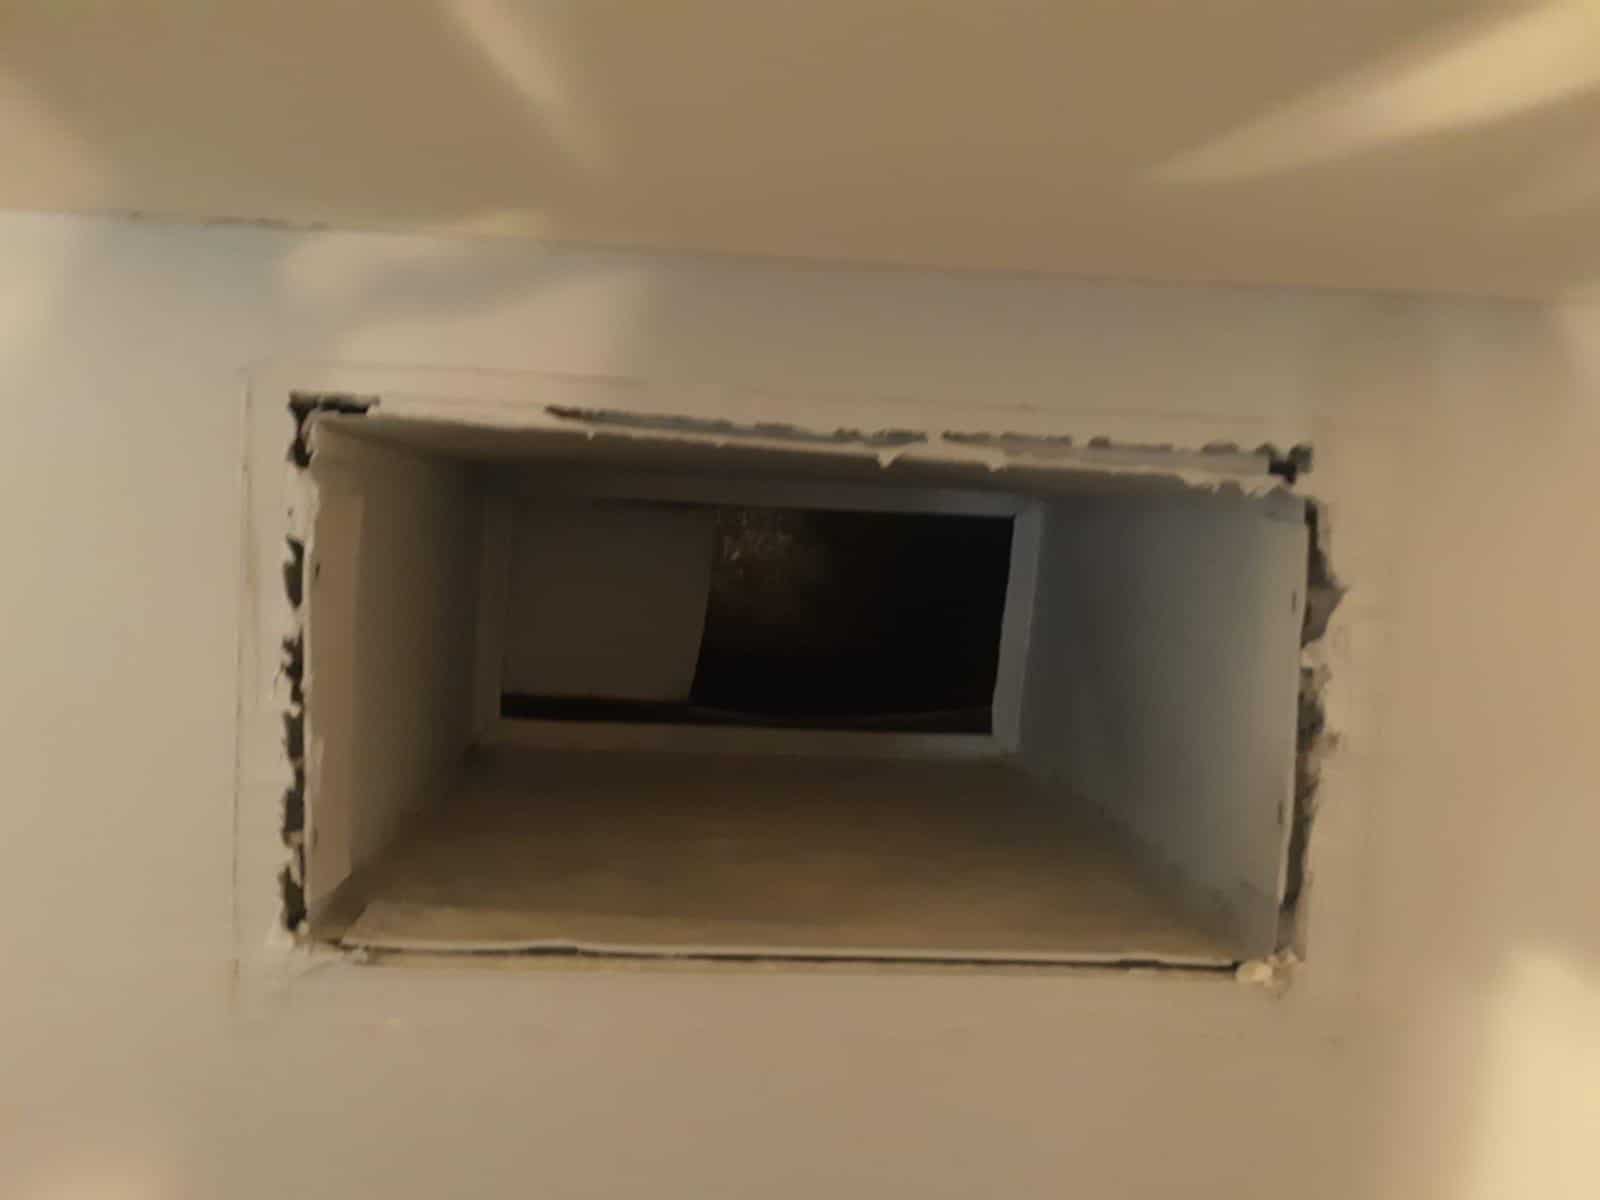 Air Duct Cleaning Benefits